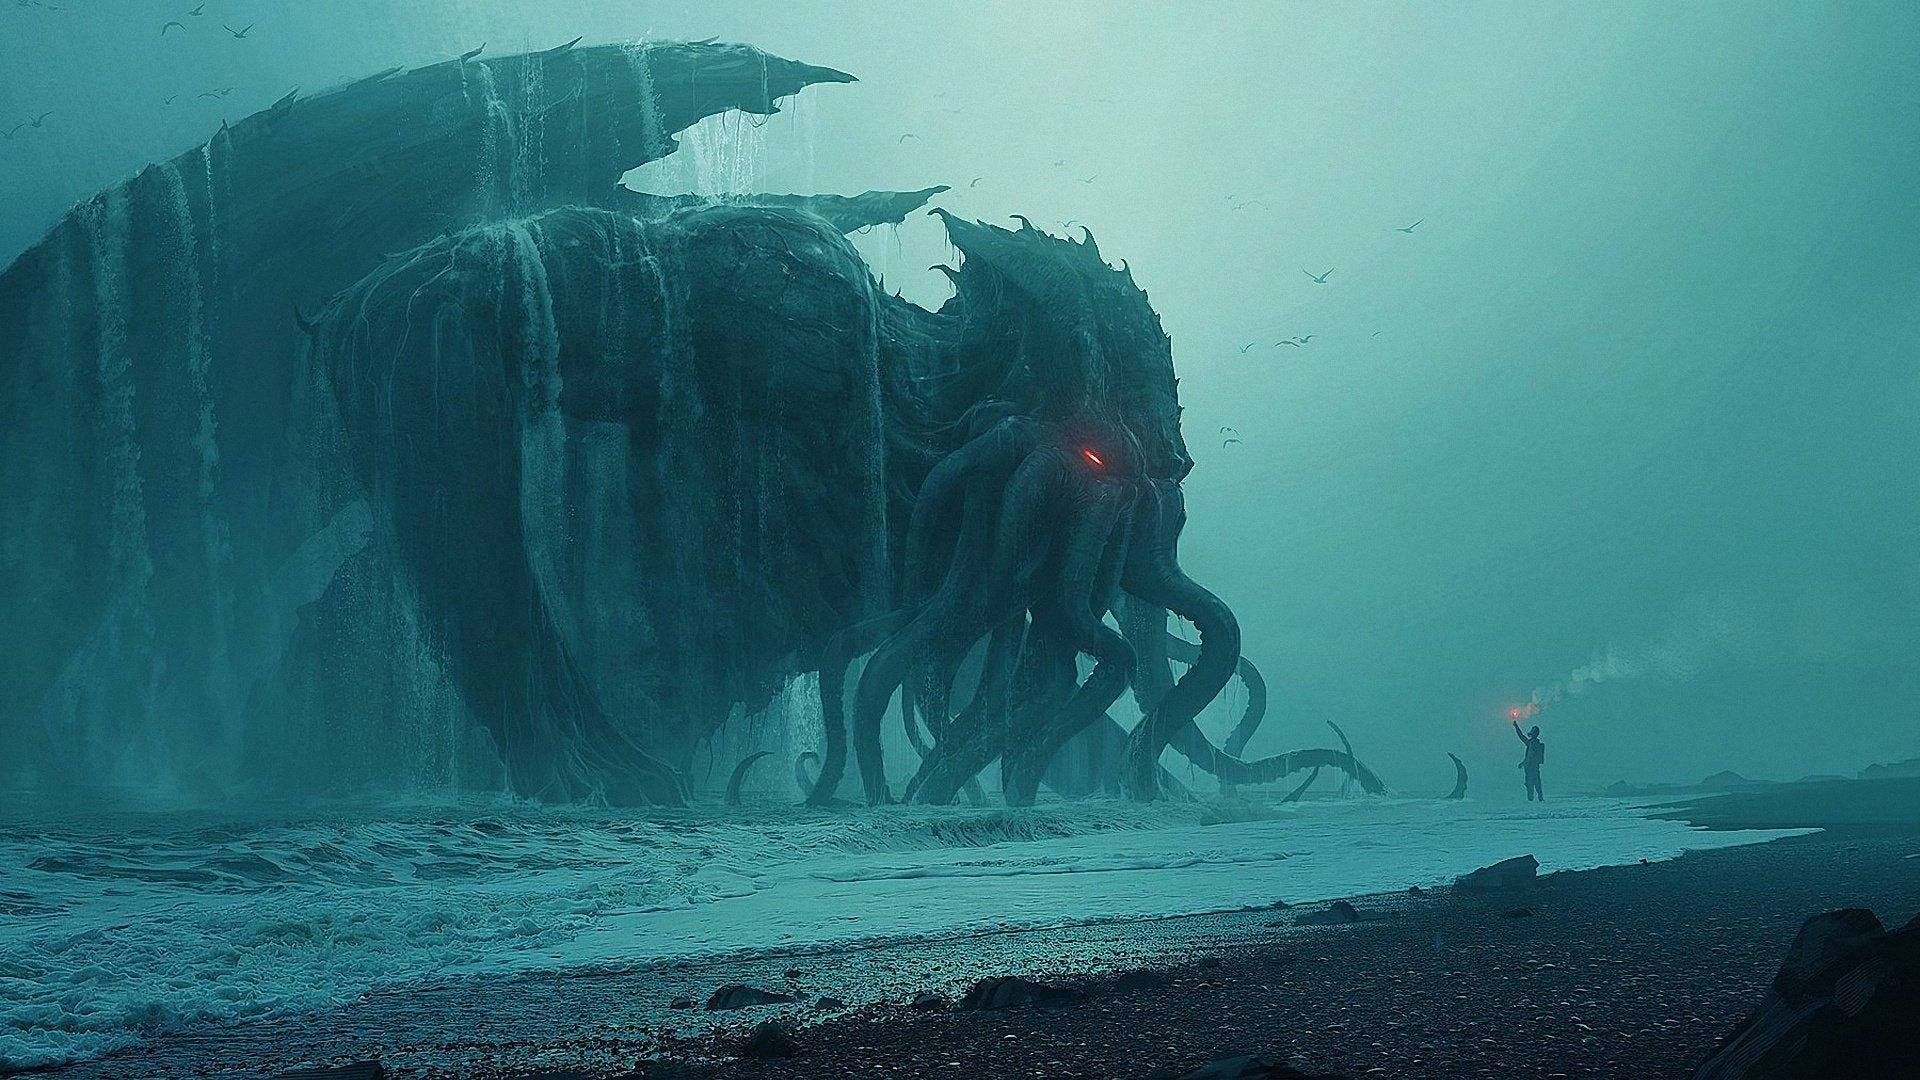 Cthulhu 1920X1080 Wallpaper and Background Image